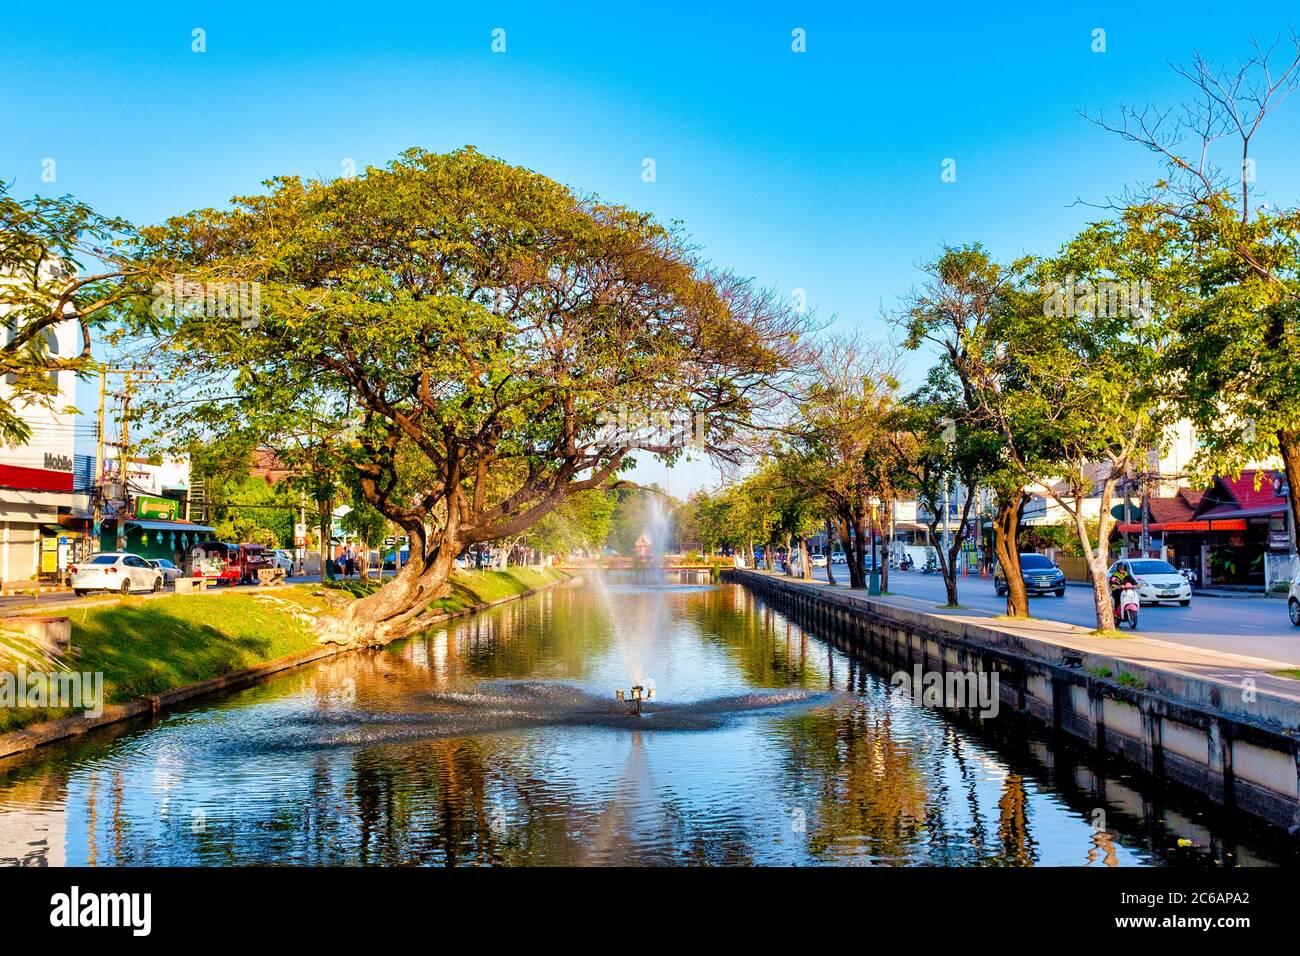 The Old City Moat in Chiang Mai, Thailand Stock Photo